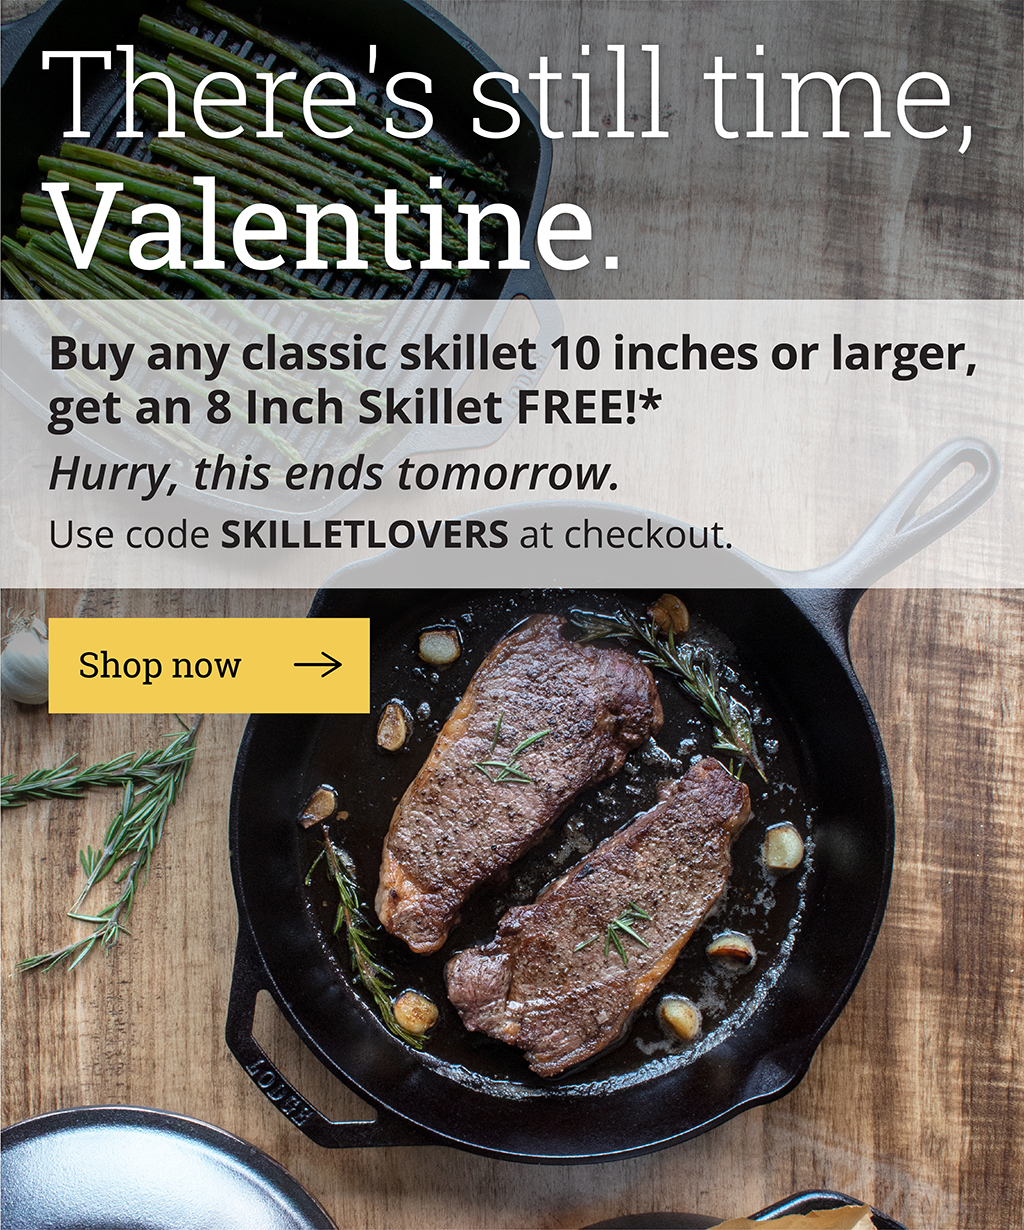 There's still time, Valentine.  Buy any skillet 10 inches or larger, get an 8 Inch Skillet FREE!*  Hurry, this ends tomorrow.  Use code SKILLETLOVERS at checkout.  [Shop now]